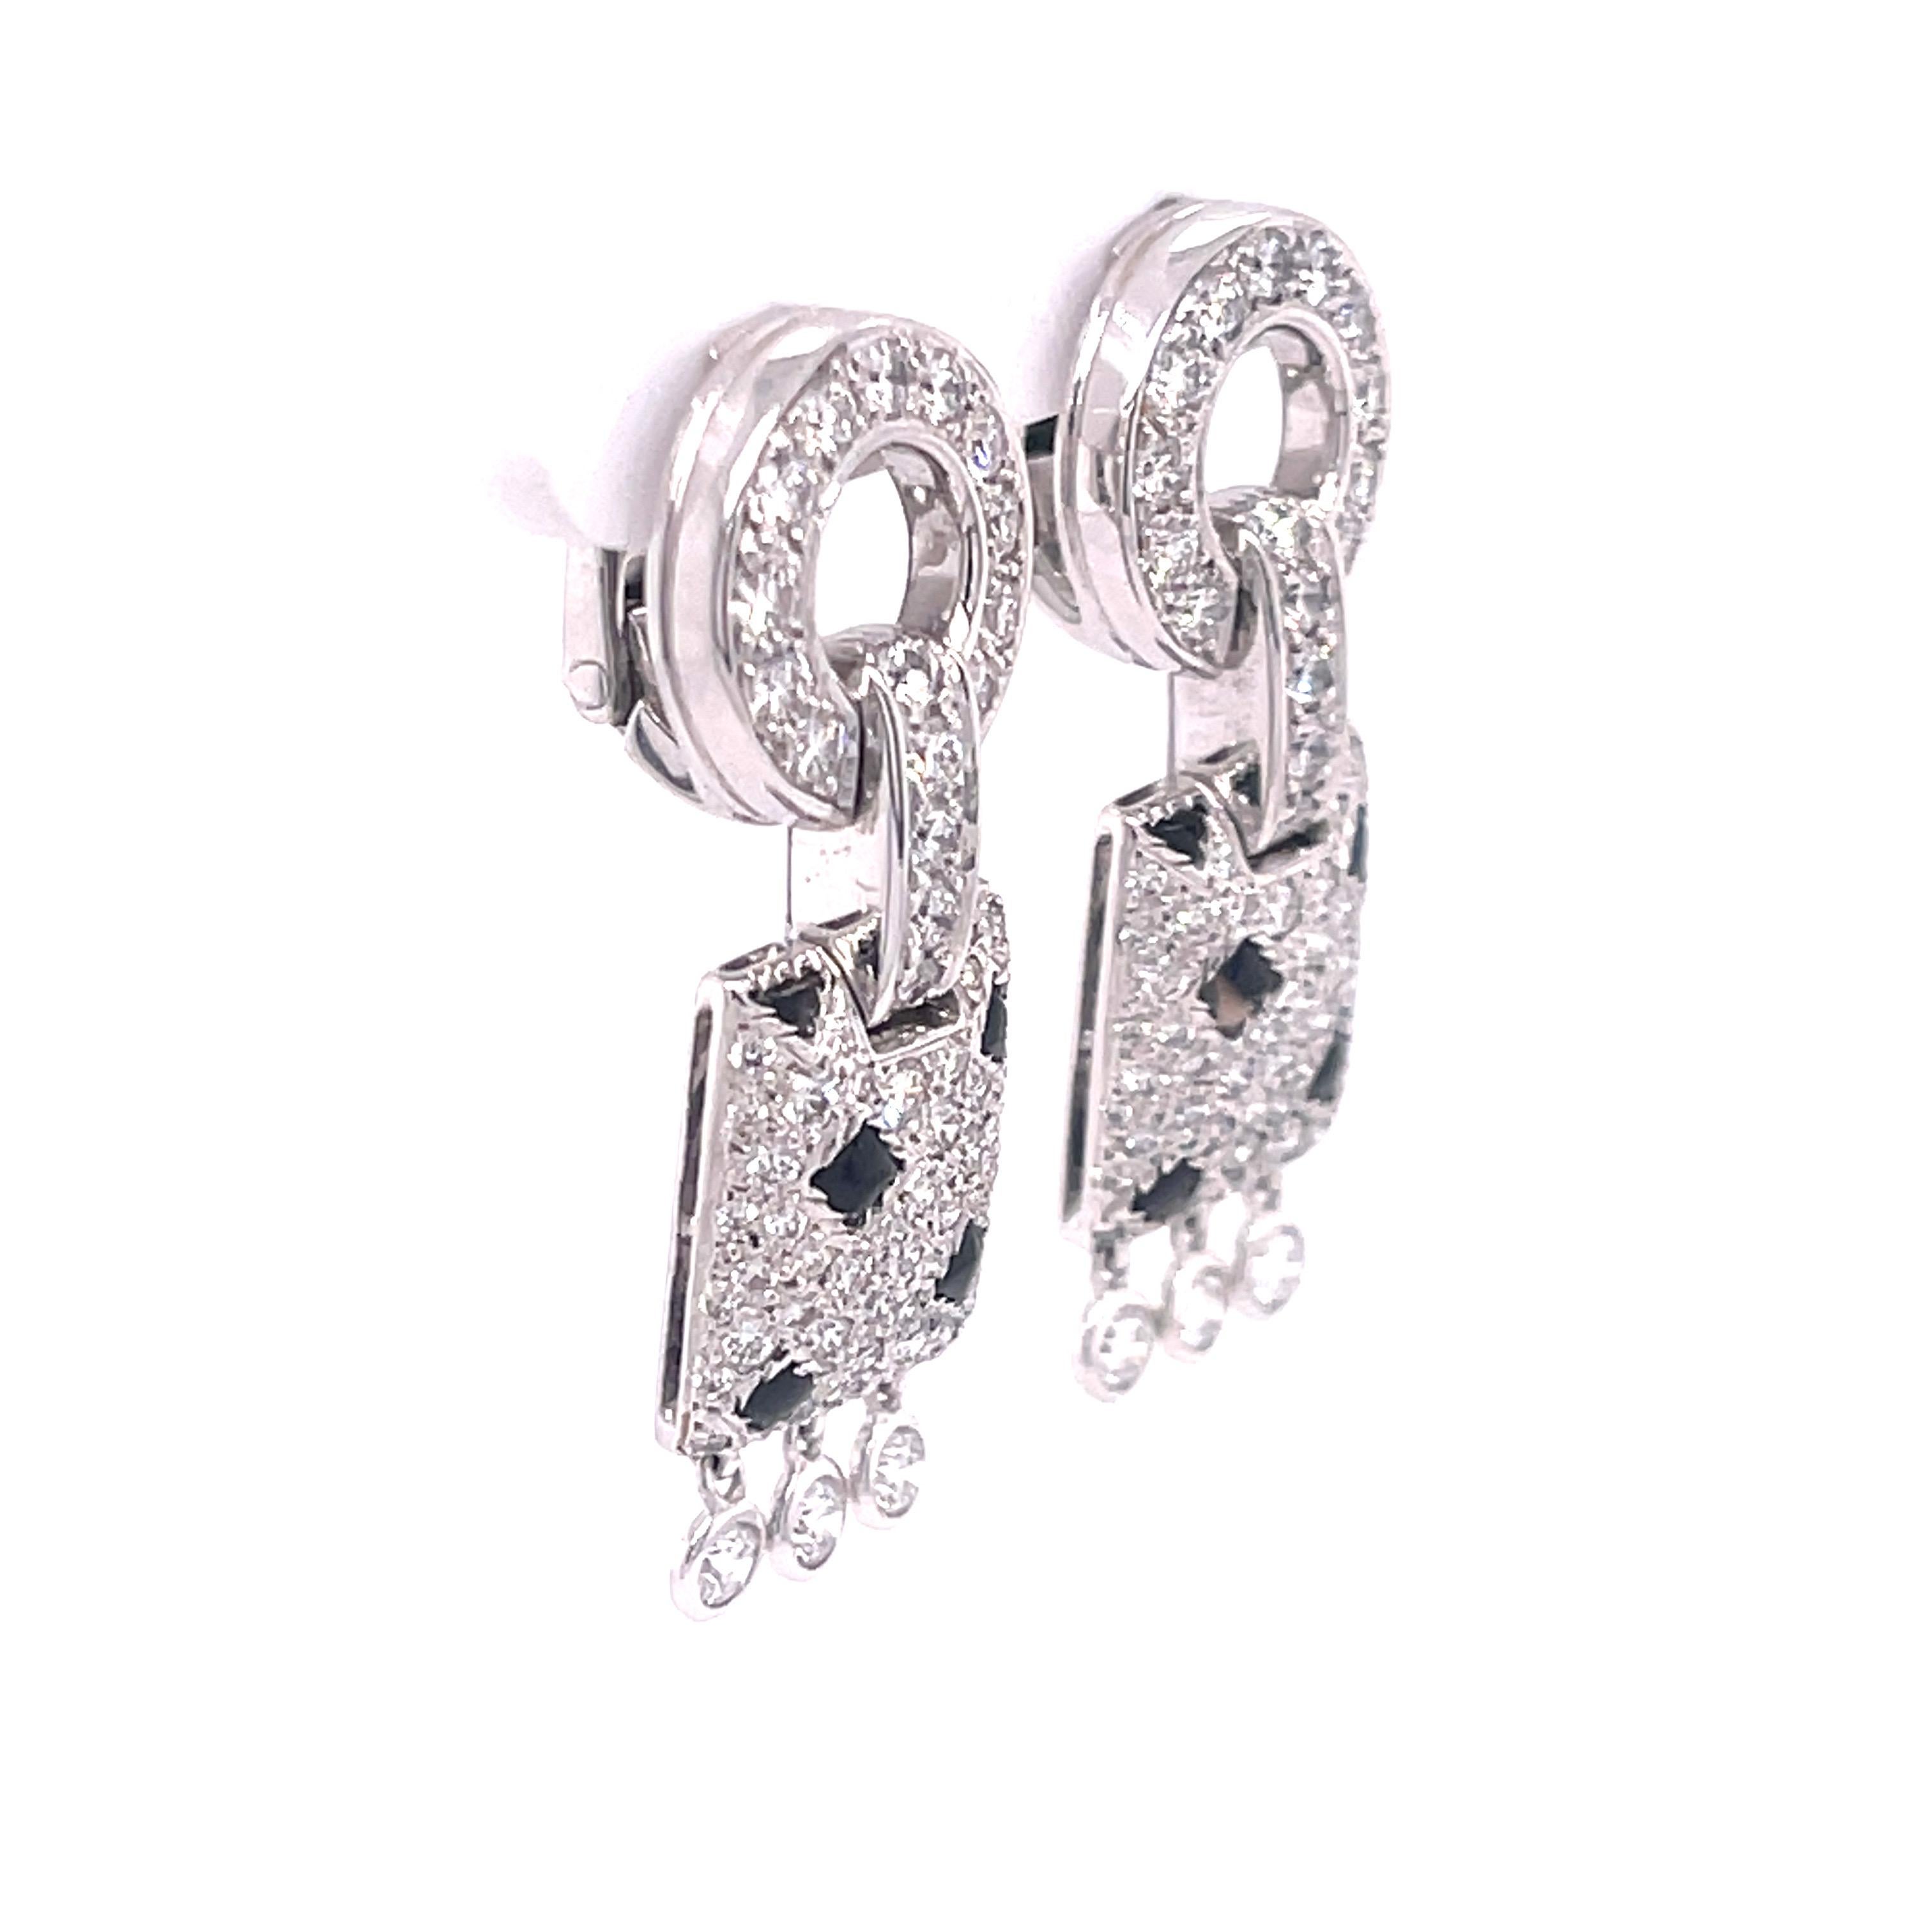 Cartier Panthere Pelage Onyx and Diamond Earrings in 18K White Gold. The earrings feature approximately 1ctw of brilliant cut diamonds, G+ color, VS clarity. 